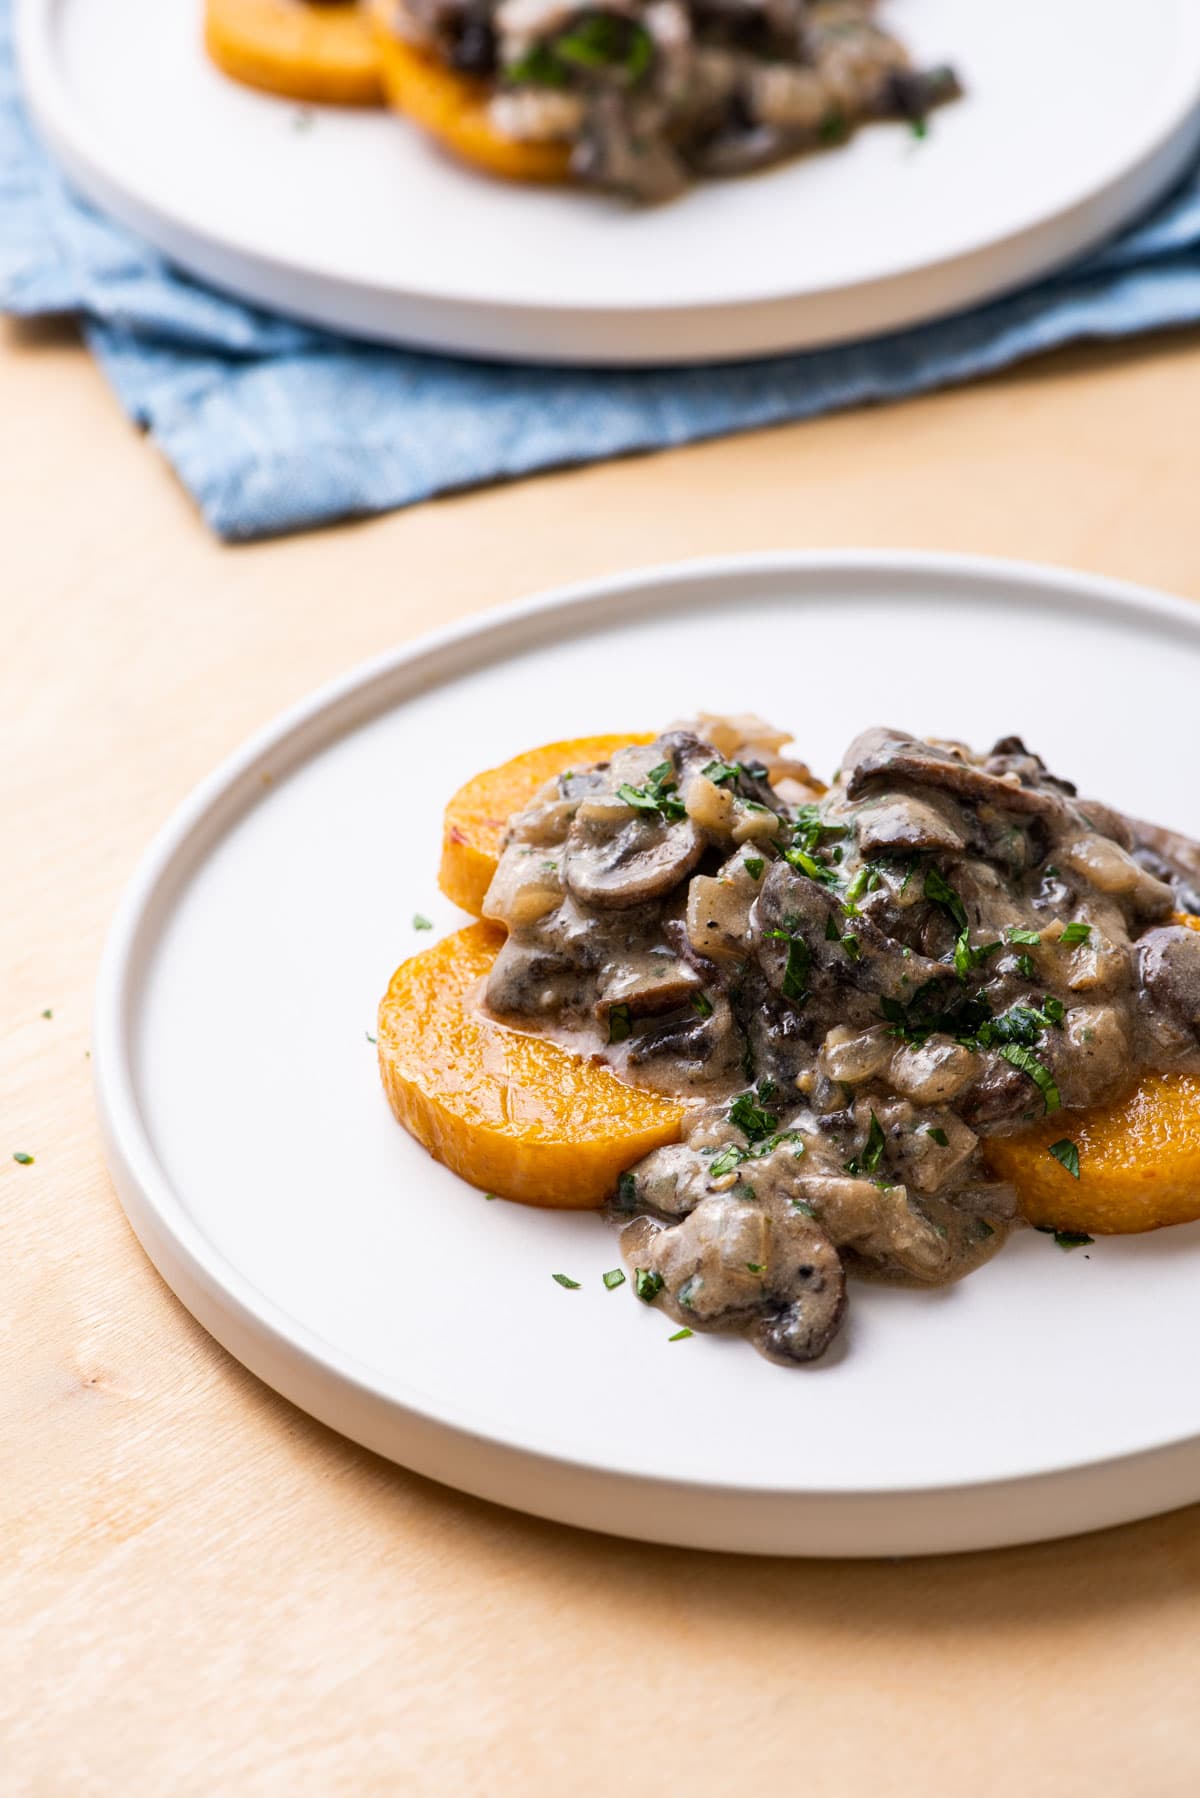 Baked polenta cakes (made with tube polenta) topped with creamy mushroom sauce.